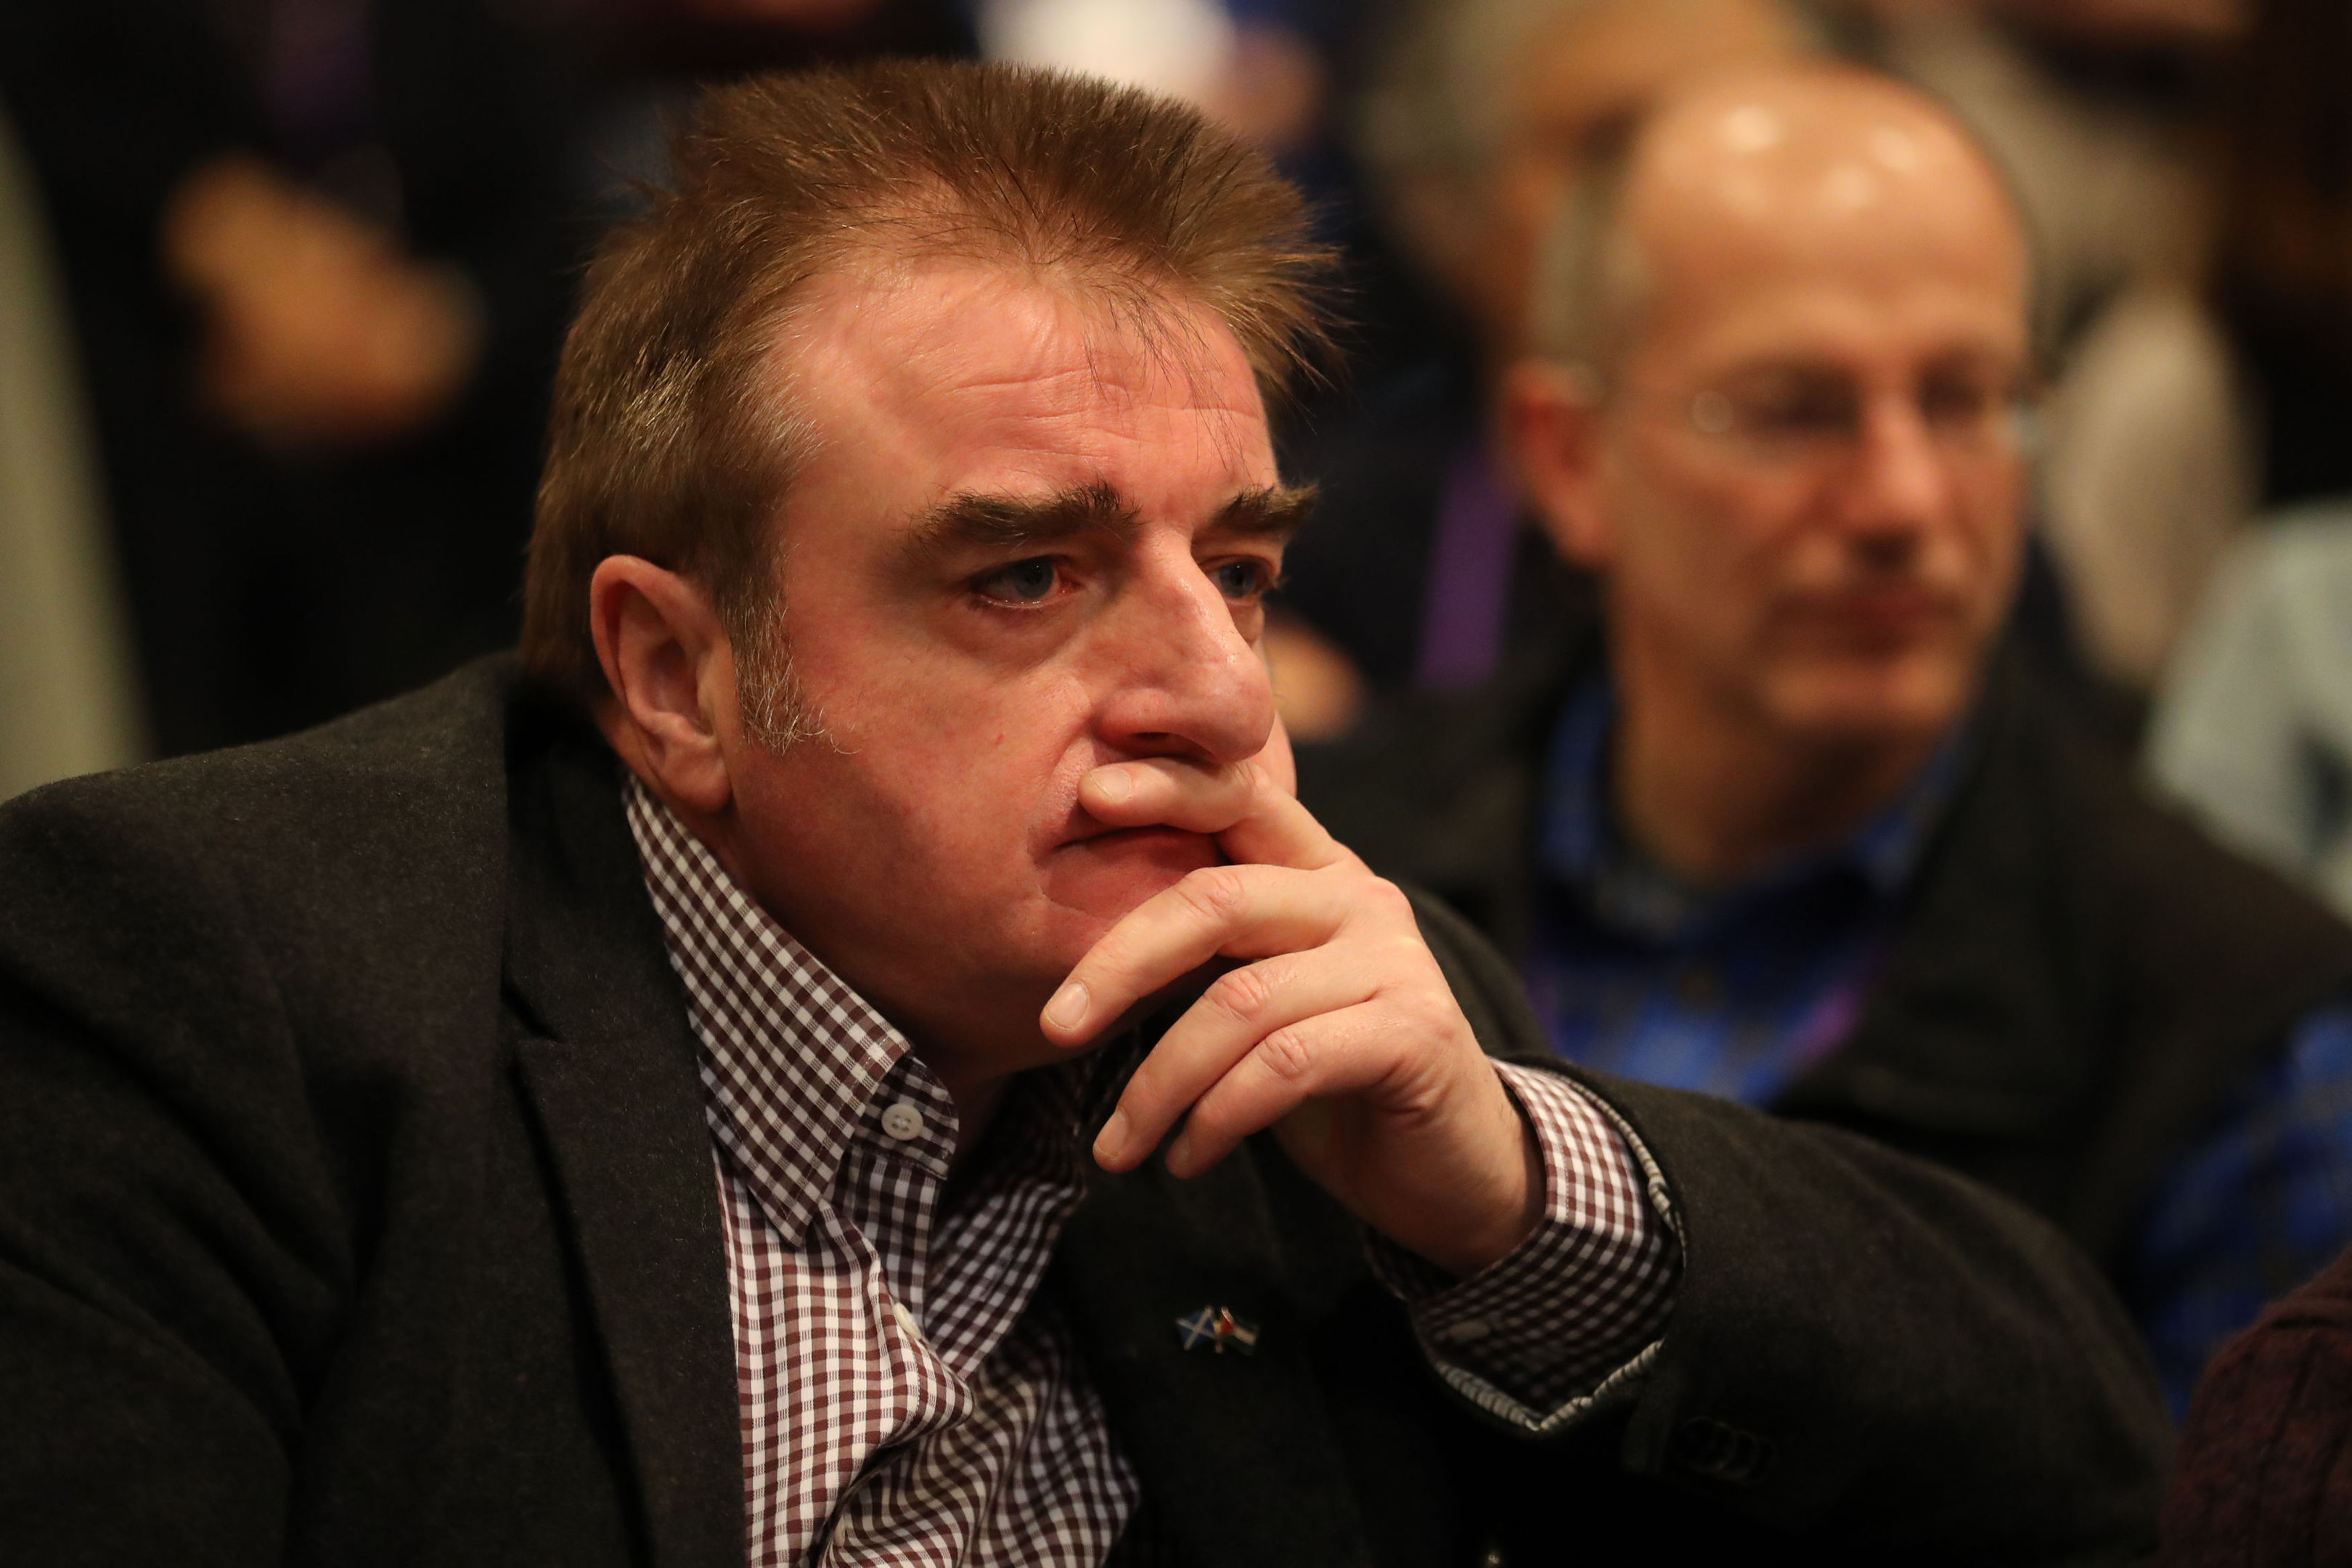 Tommy Sheppard MP at the Scottish Independence Convention (SIC) conference in Glasgow (Andrew Milligan/PA Wire)